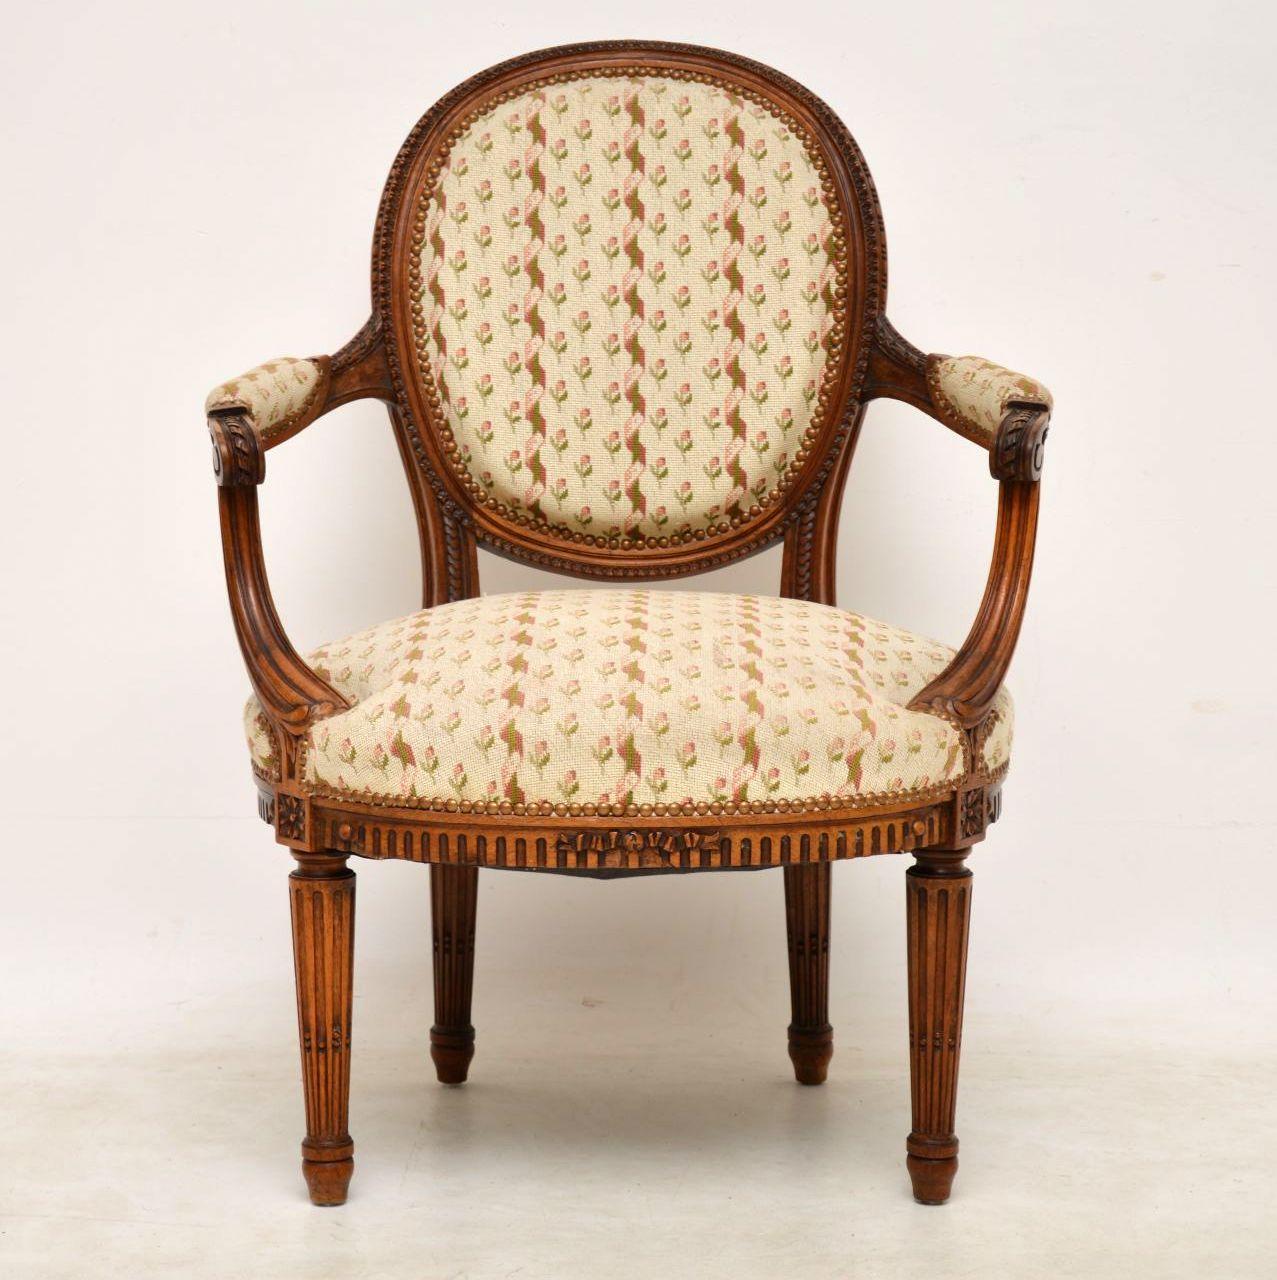 Antique French carved walnut framed salon armchair in good original condition. It’s structurally sound and the upholstery is still okay, although I think the seat springs need a bit of attention. We do normally recover upholstered furniture, but